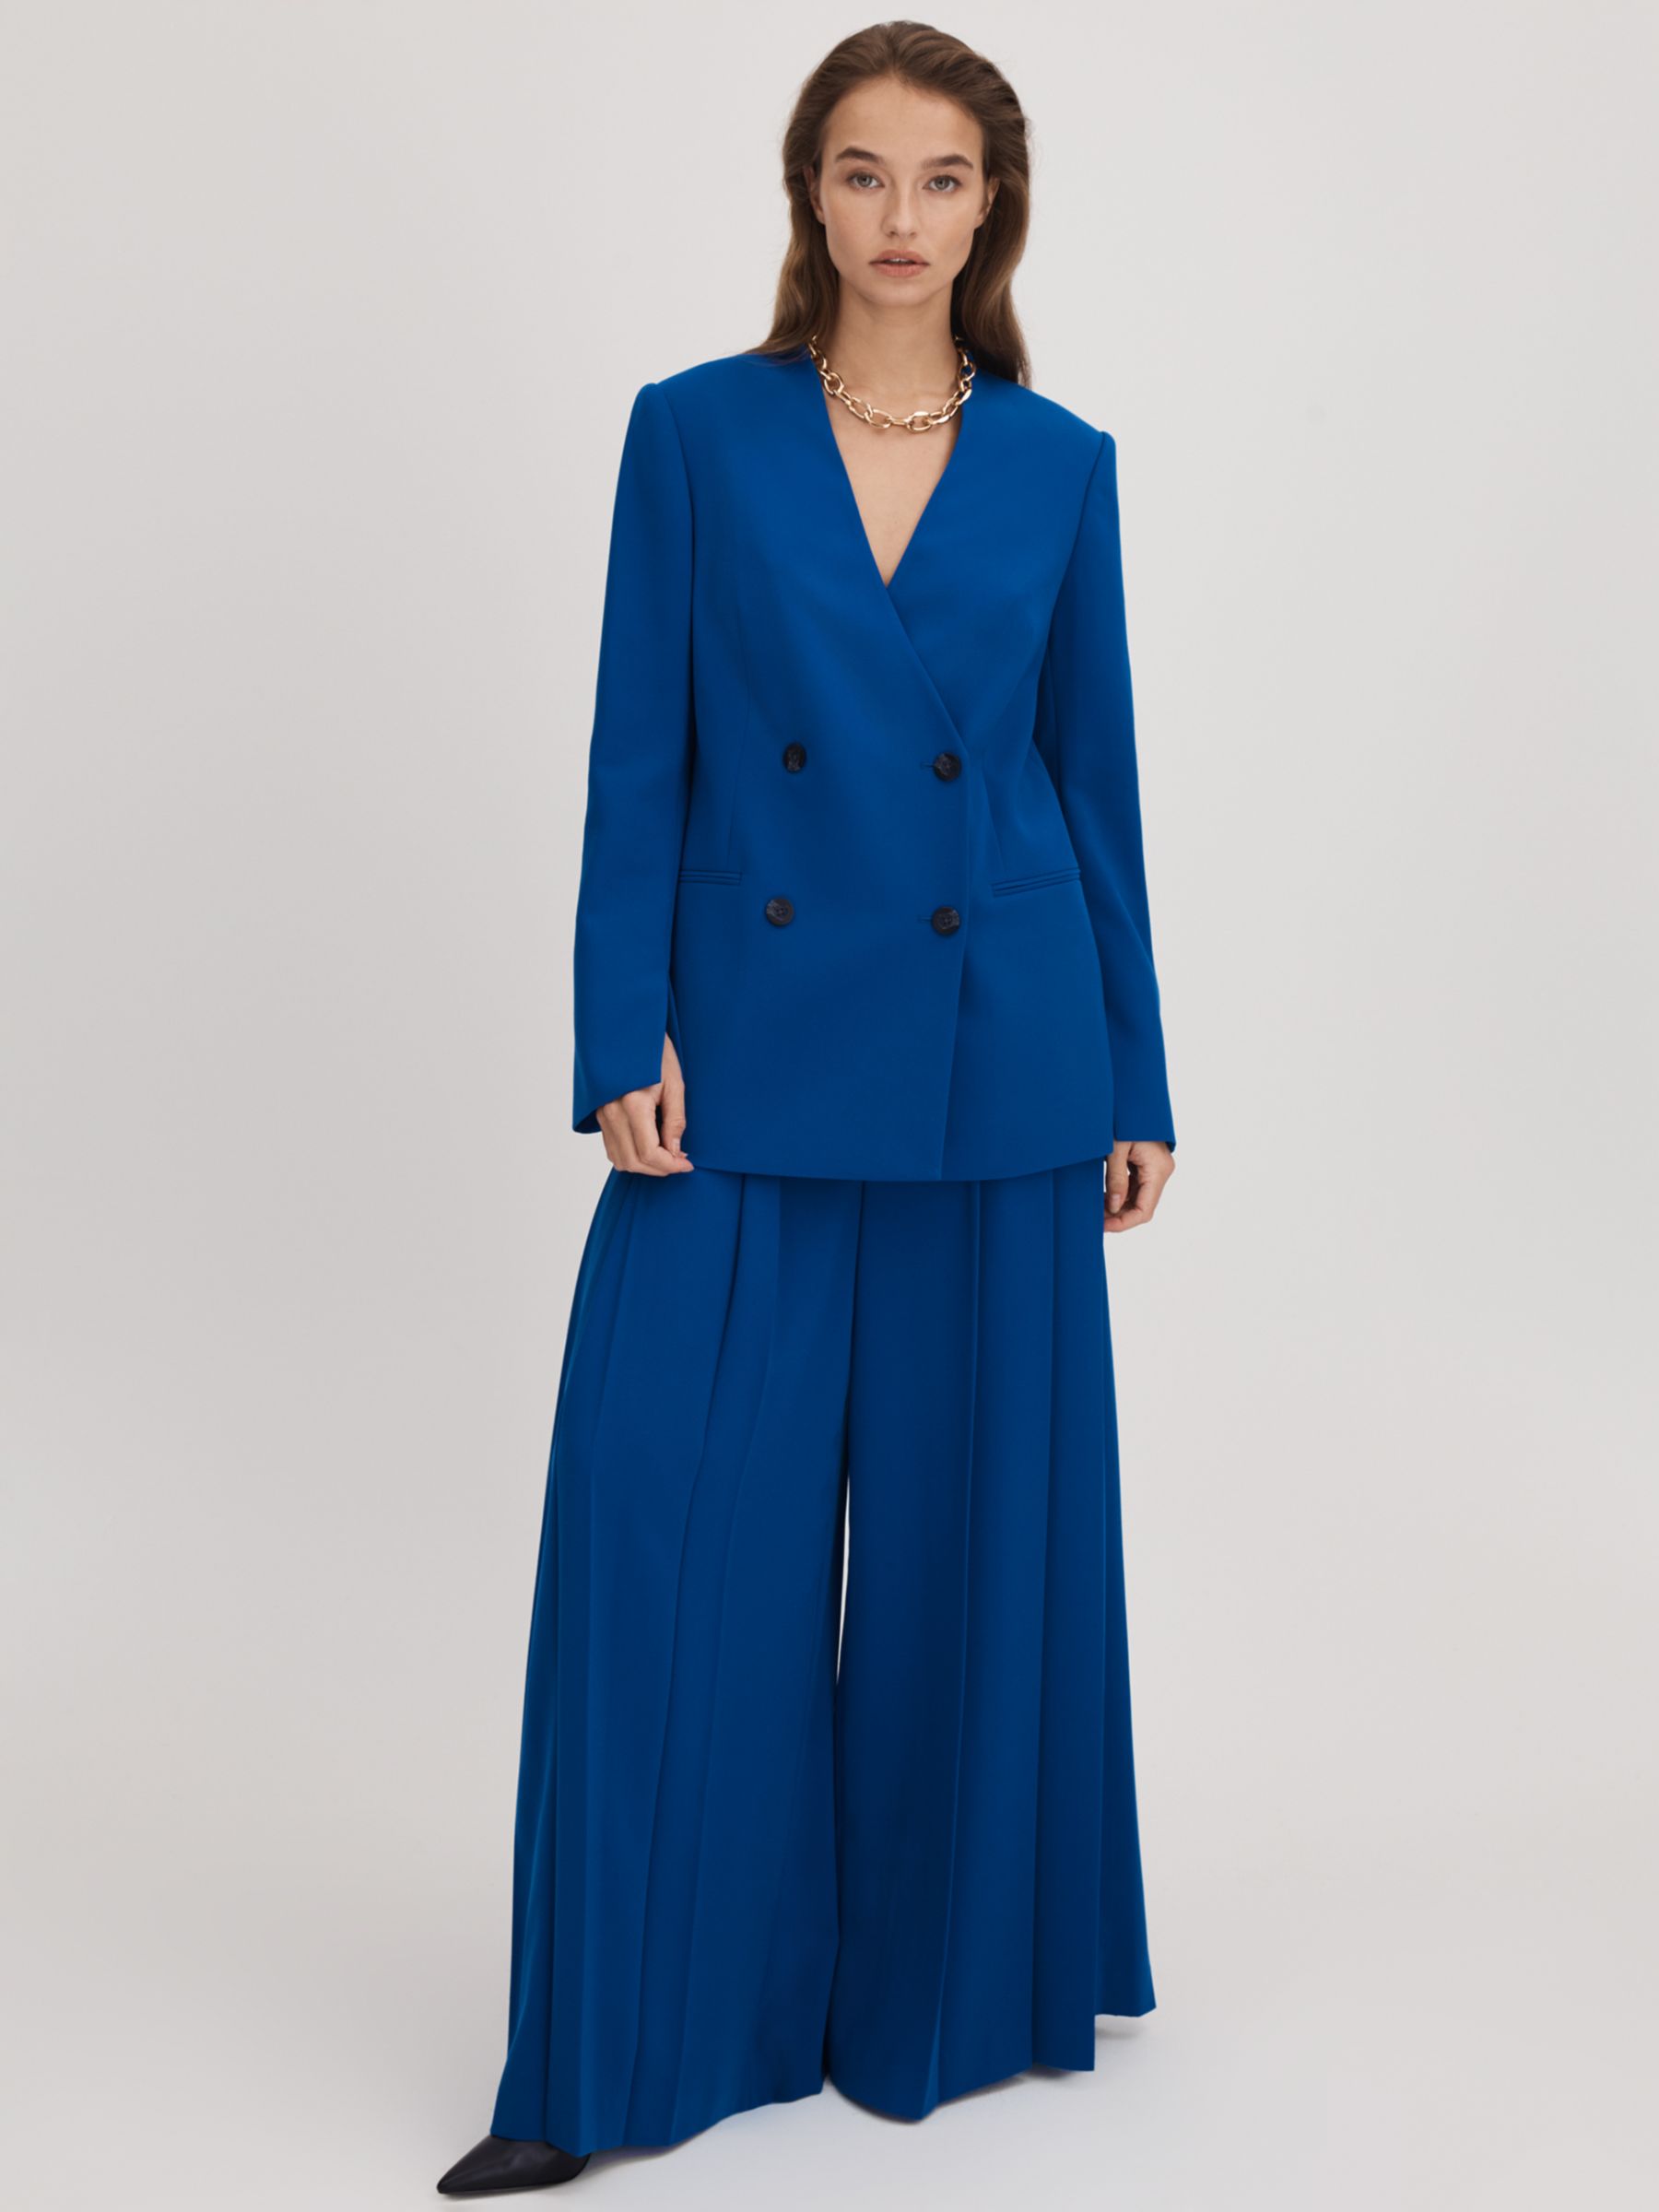 Buy FLORERE Collarless Double Breasted Blazer Online at johnlewis.com